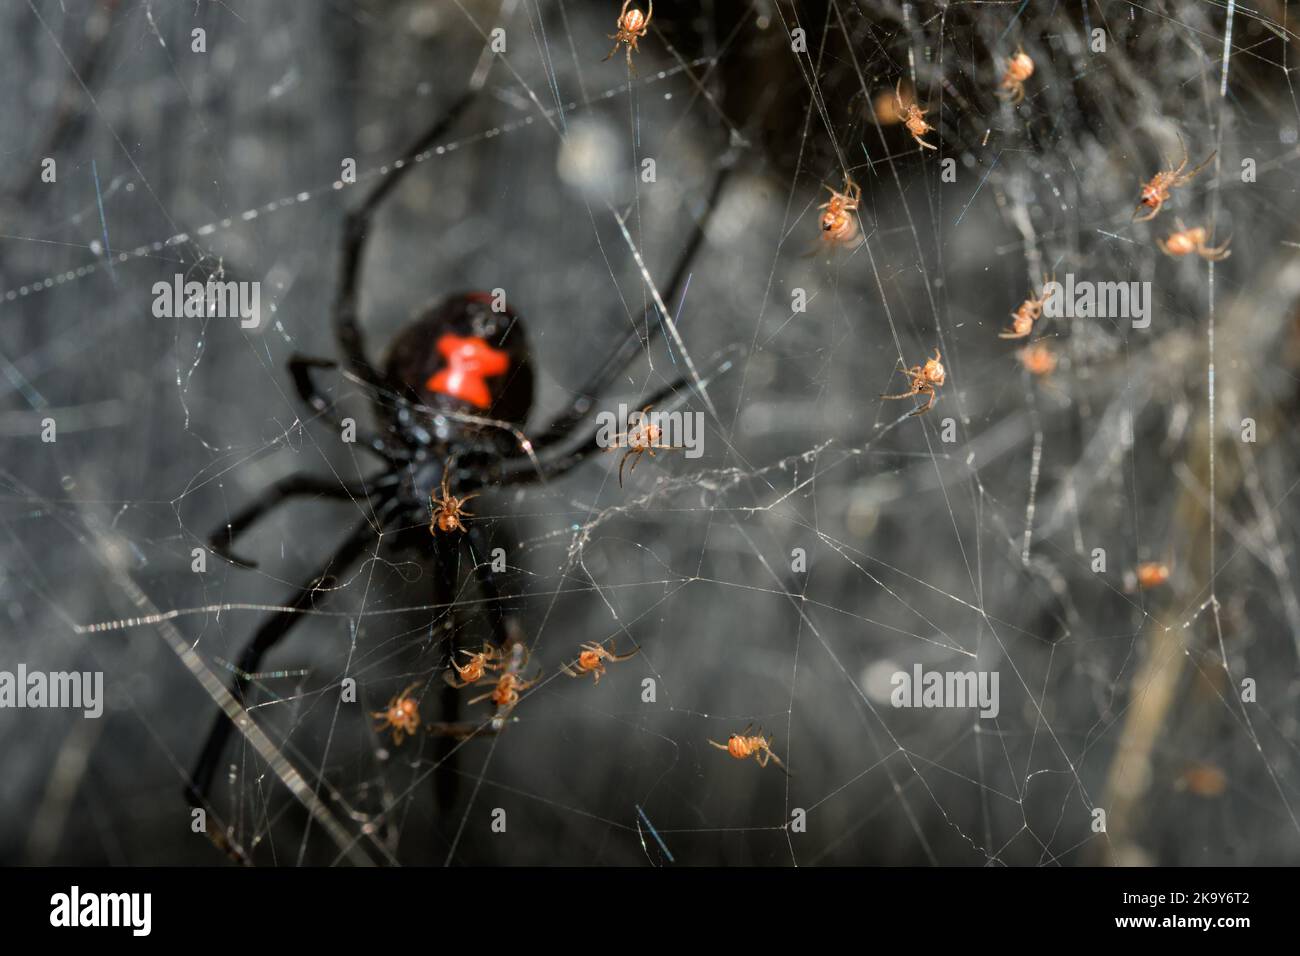 Southern Black Widow spider babies climbing on their web, with their mother guarding them farther behind Stock Photo